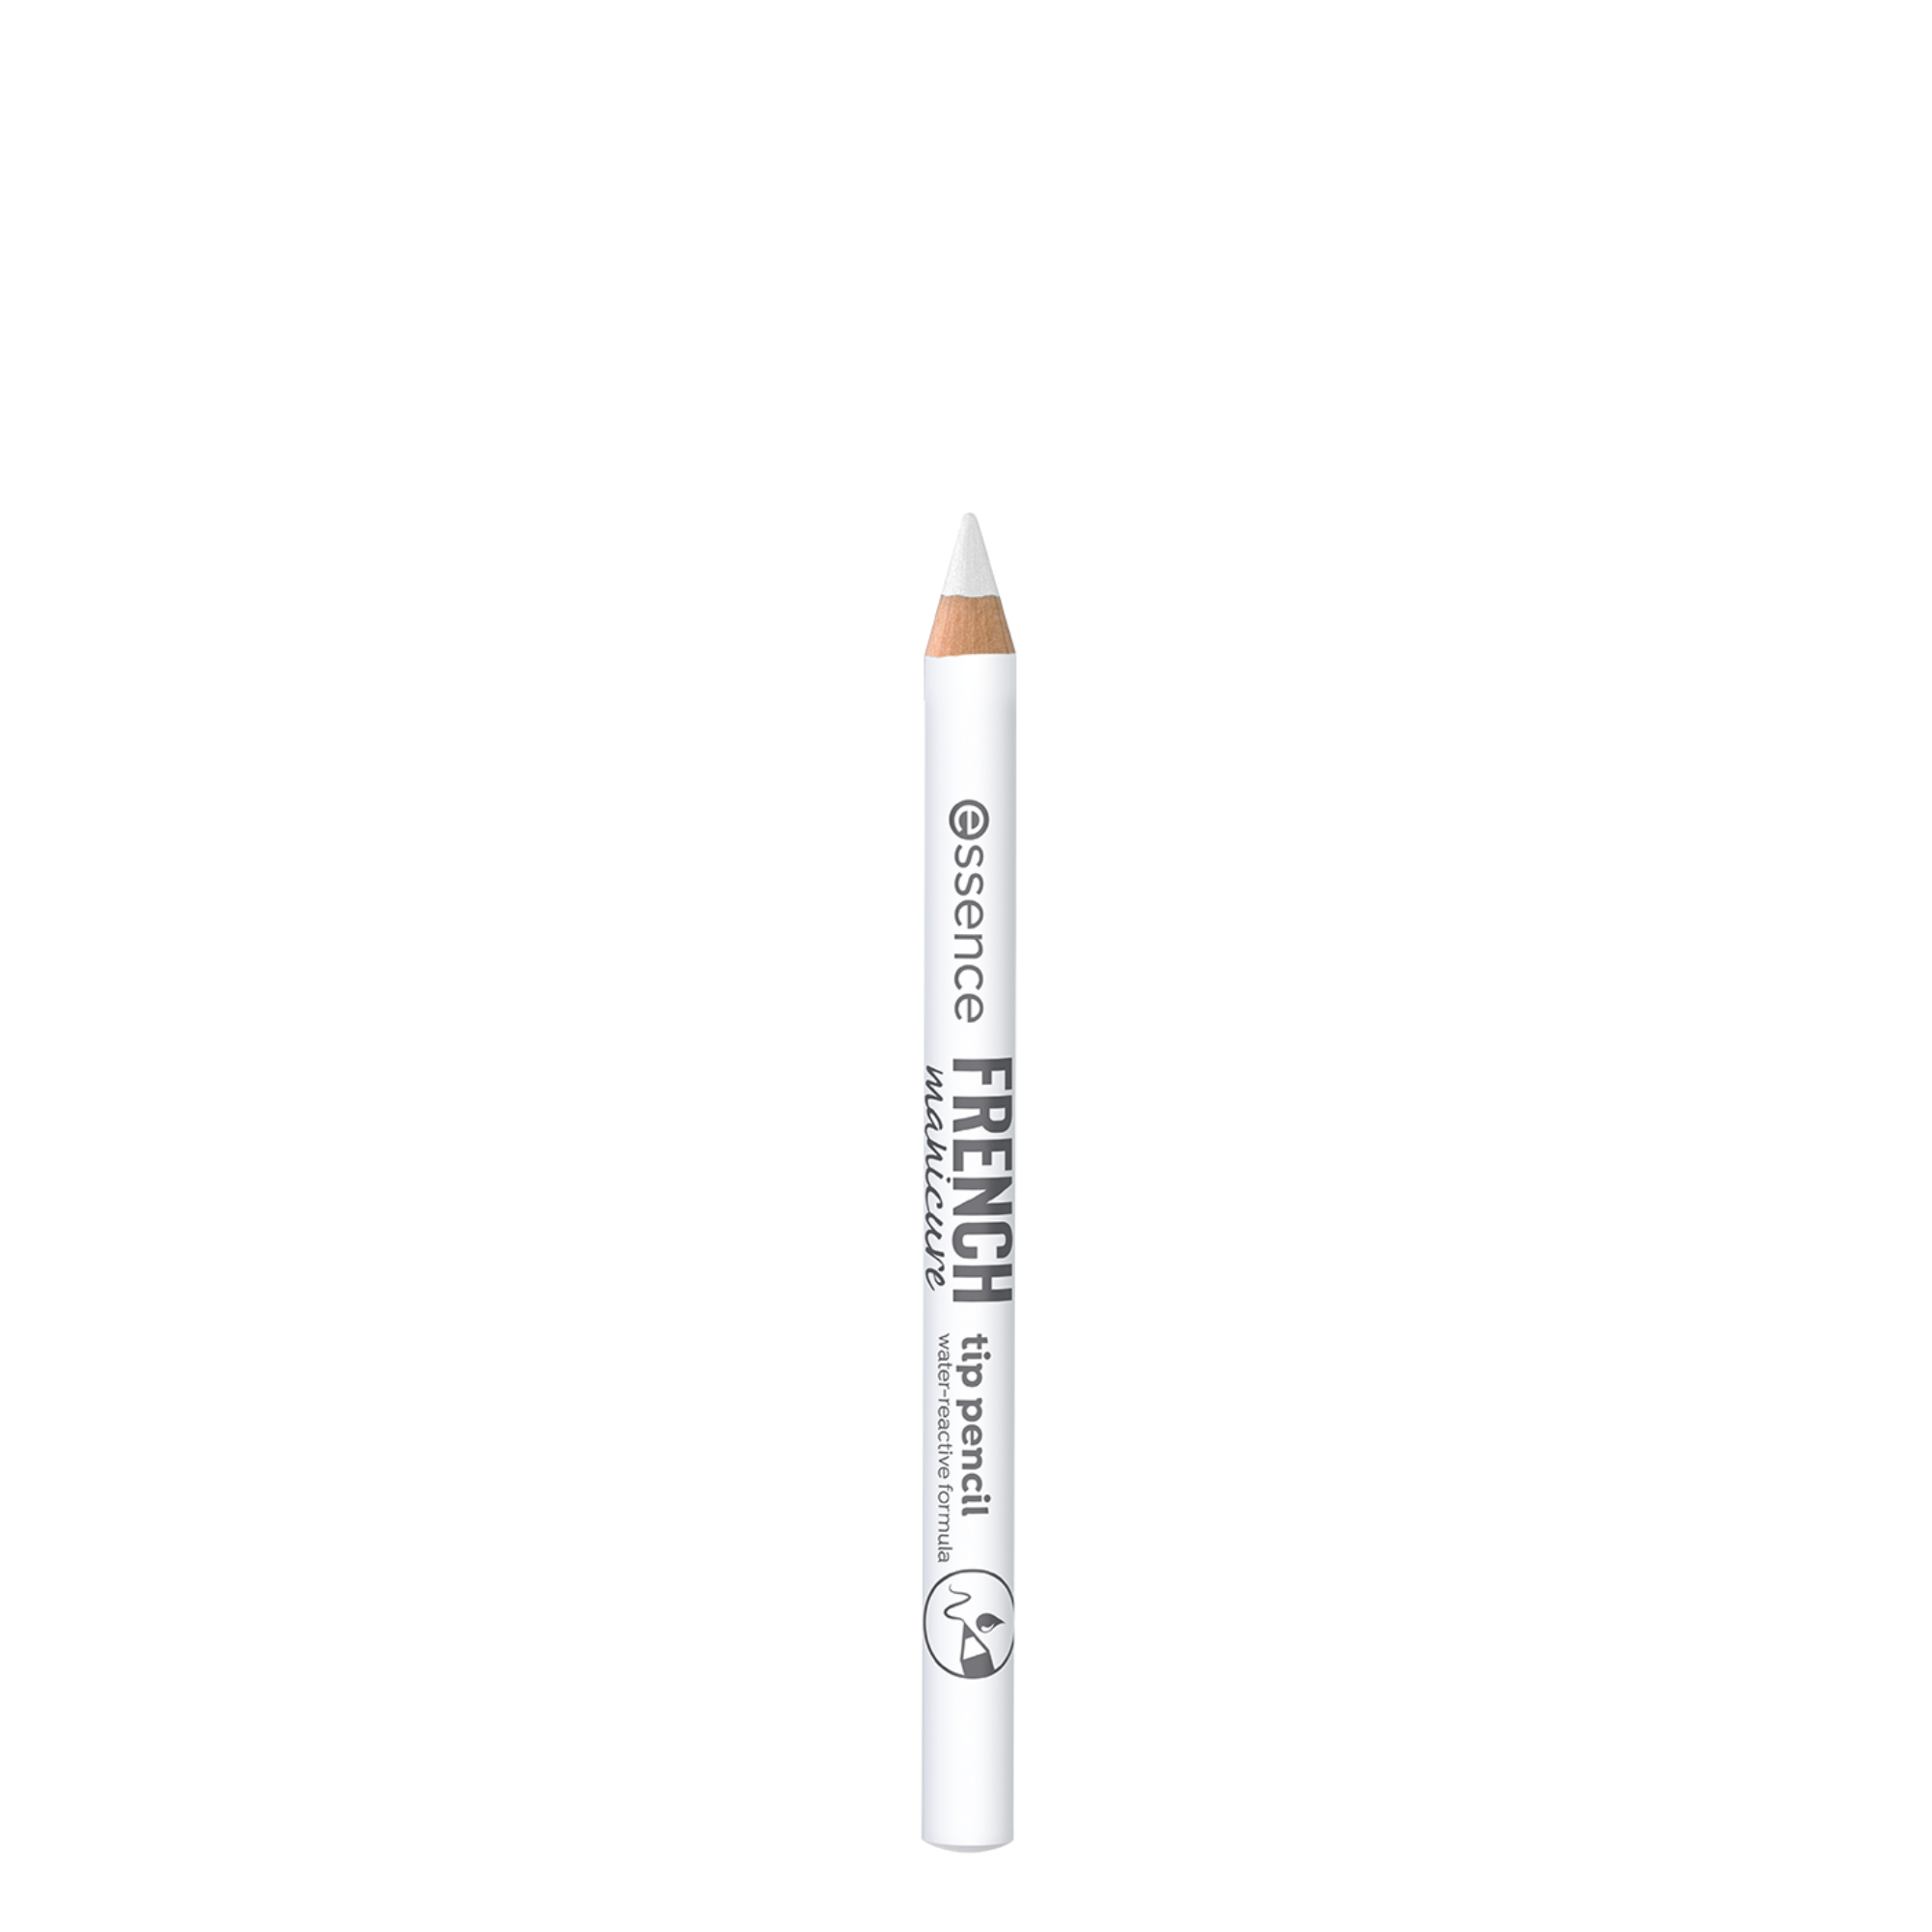 FRENCH manicure tip pencil